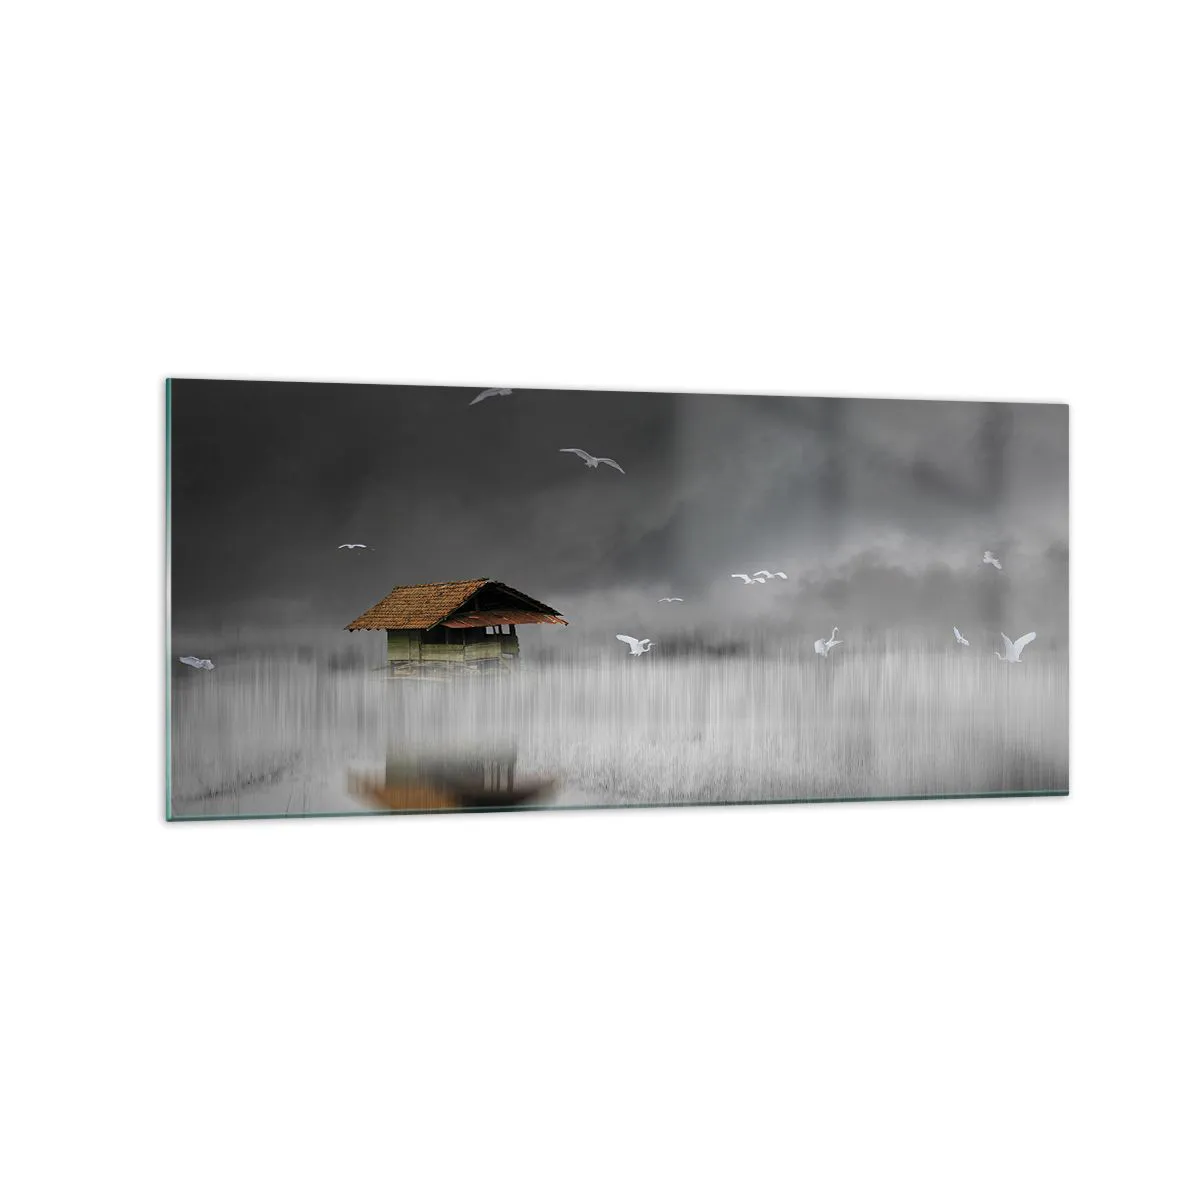 Glass picture  Arttor 120x50 cm - Shelter from the Rain - Landscape, Fog, Hut On The Water, Nature, The Birds, For living-room, For bedroom, White, Brown, Horizontal, Glass, GAB120x50-4896